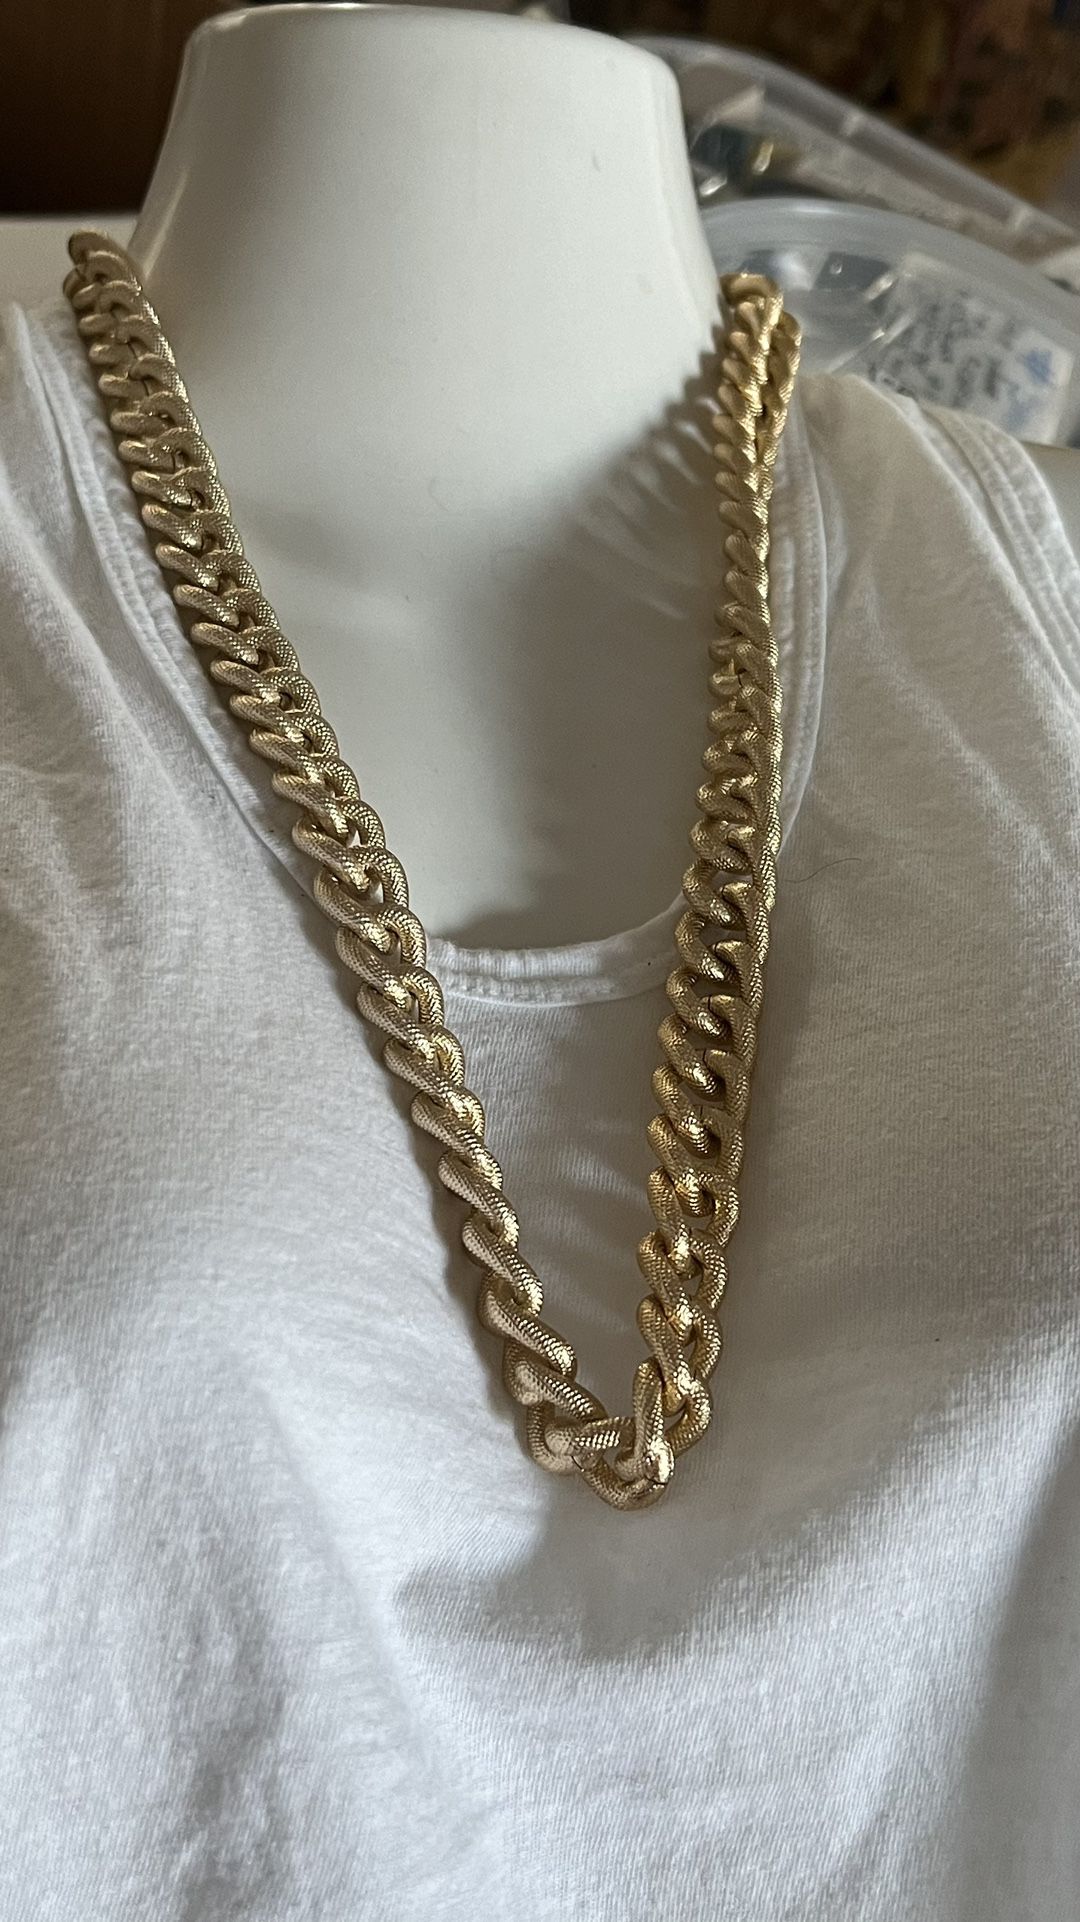 Vintage Avon Goldtone Textured Chunky Chain Necklace 24” Toggle Closure, New Never Been Used 